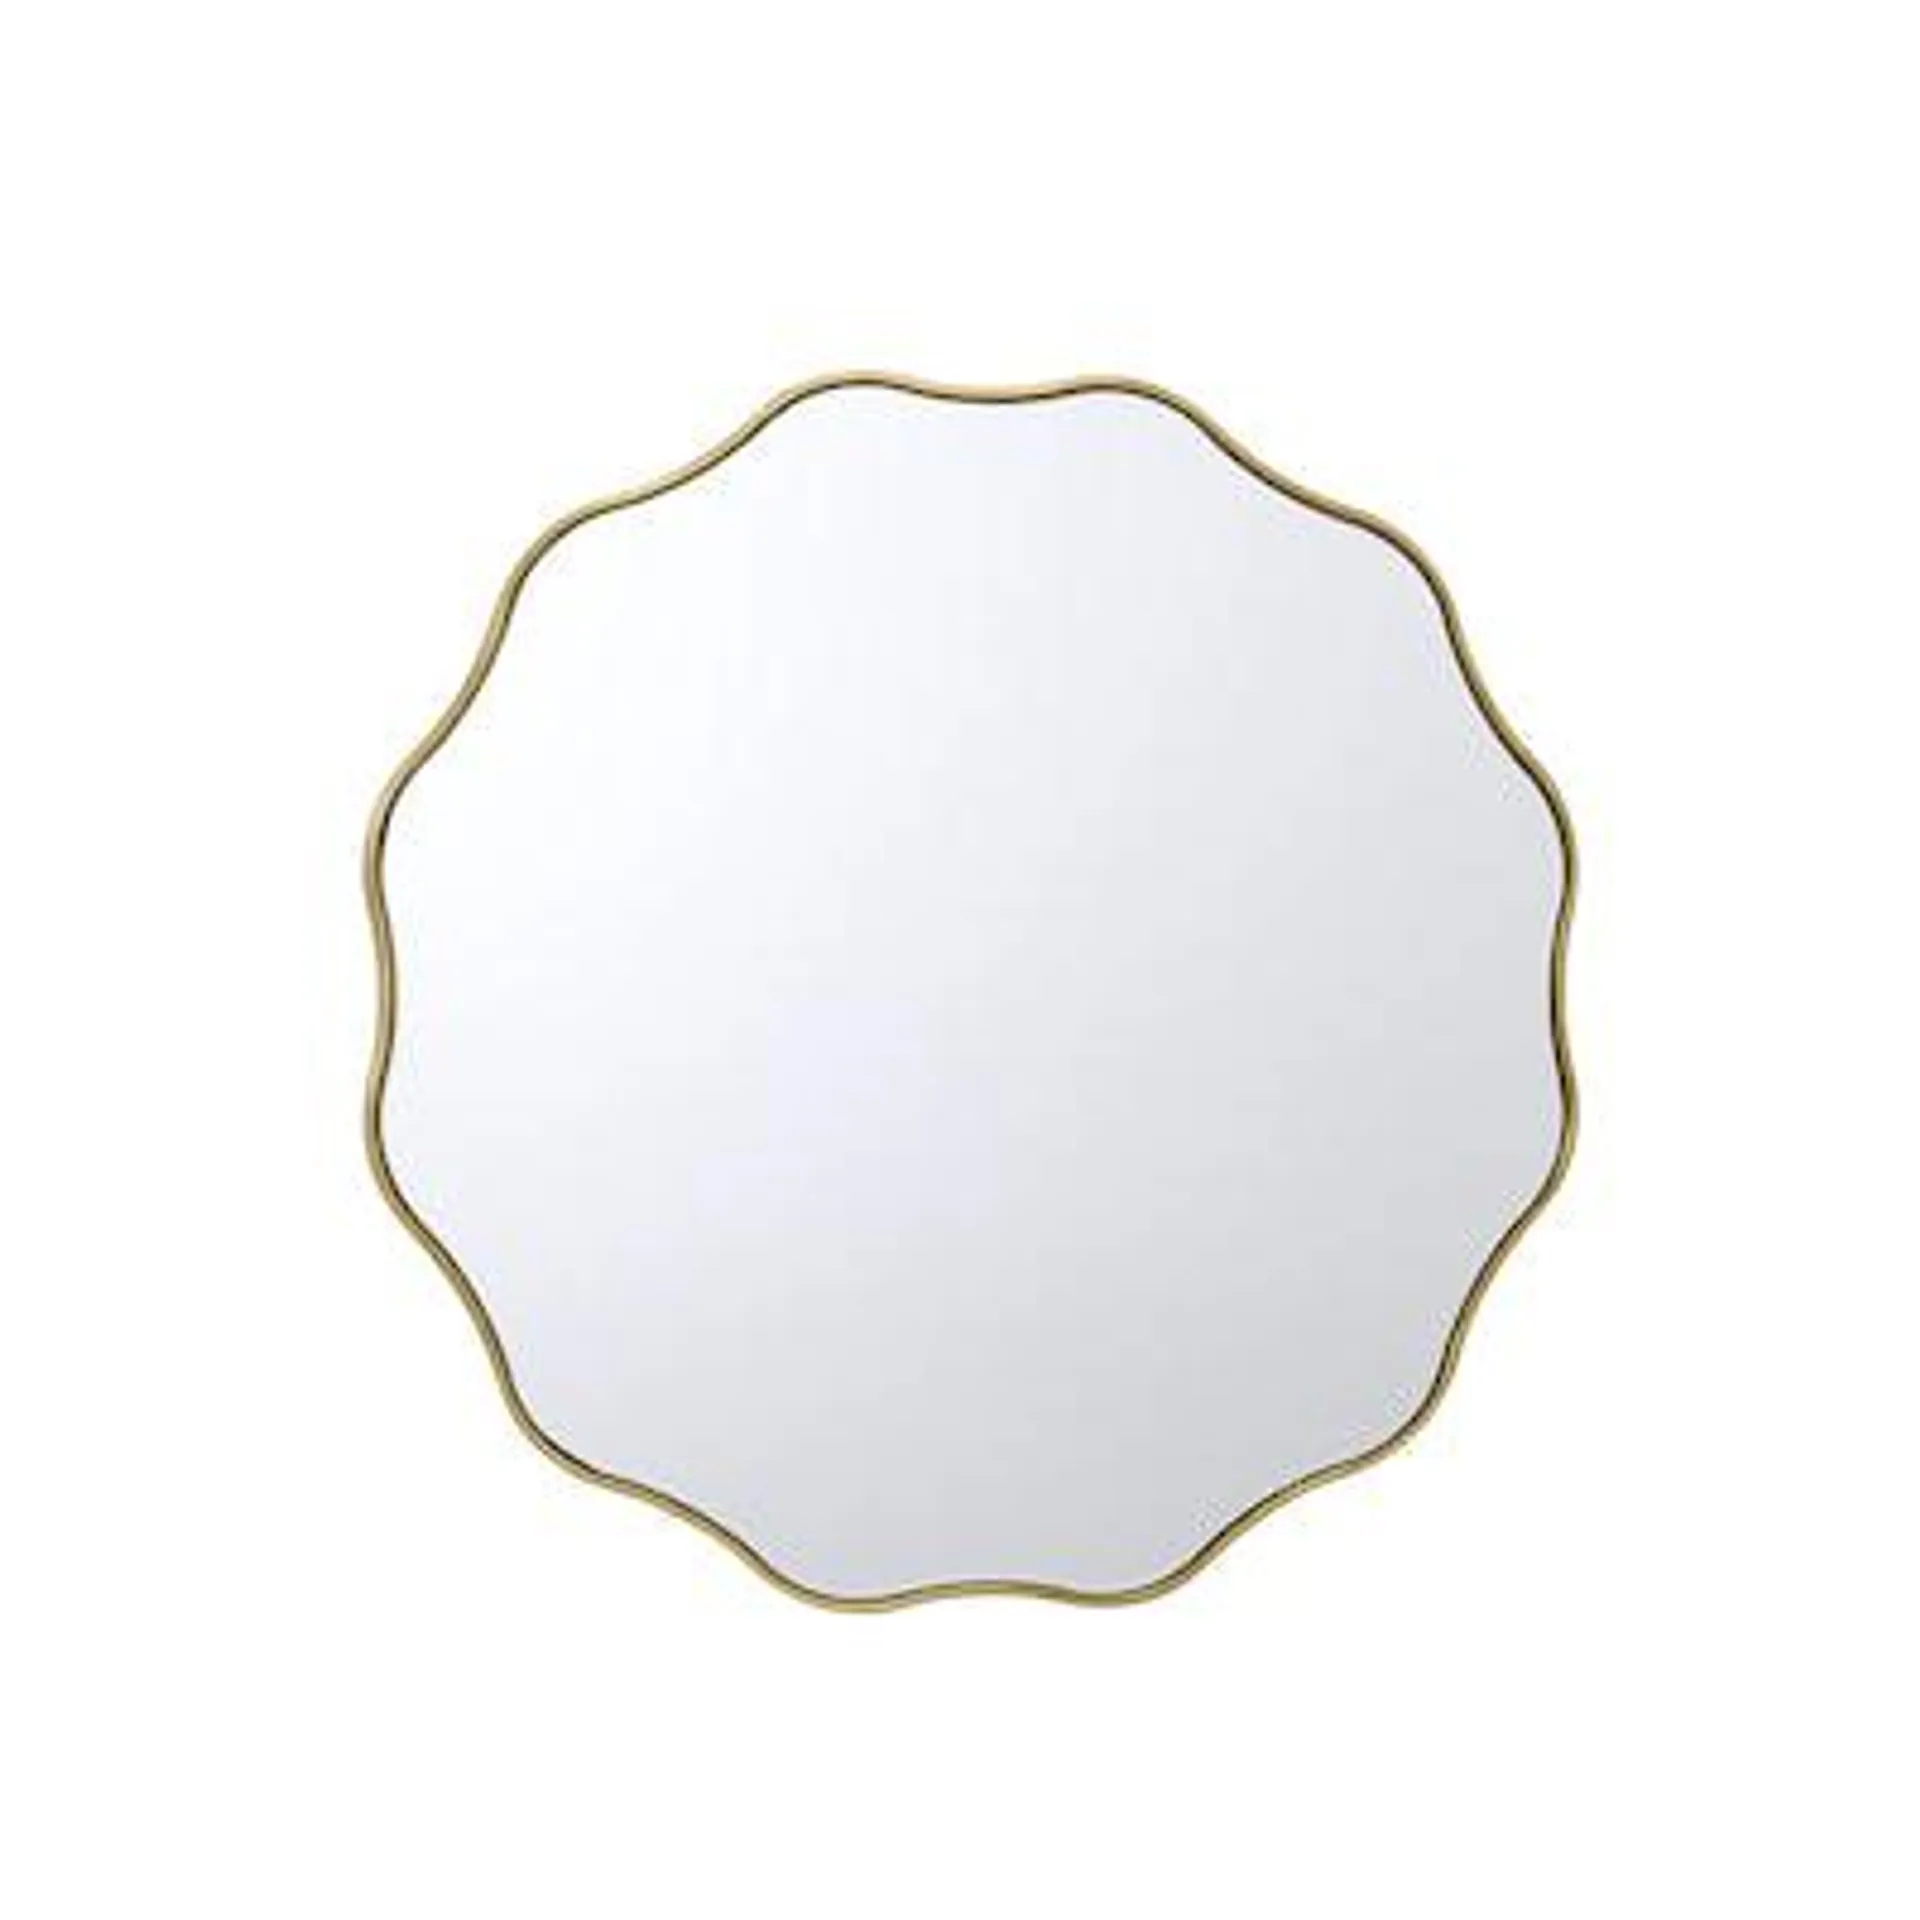 30-in W x 30-in H Round Gold Beveled Wall Mirror